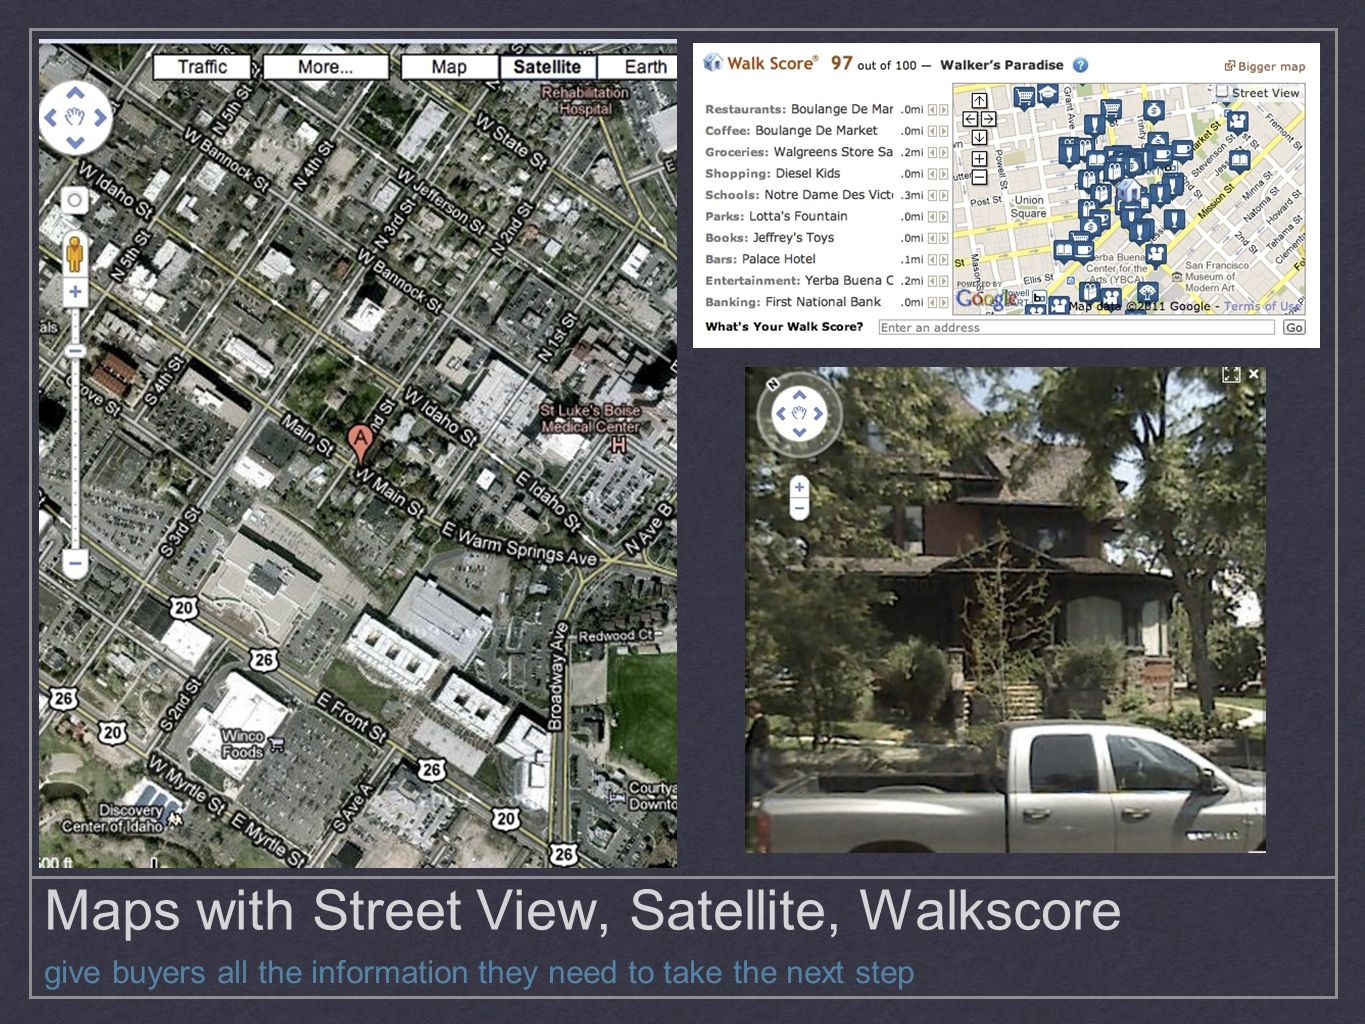 Maps with Street View, Satellite, Walkscore give buyers all the information they need to take the next step